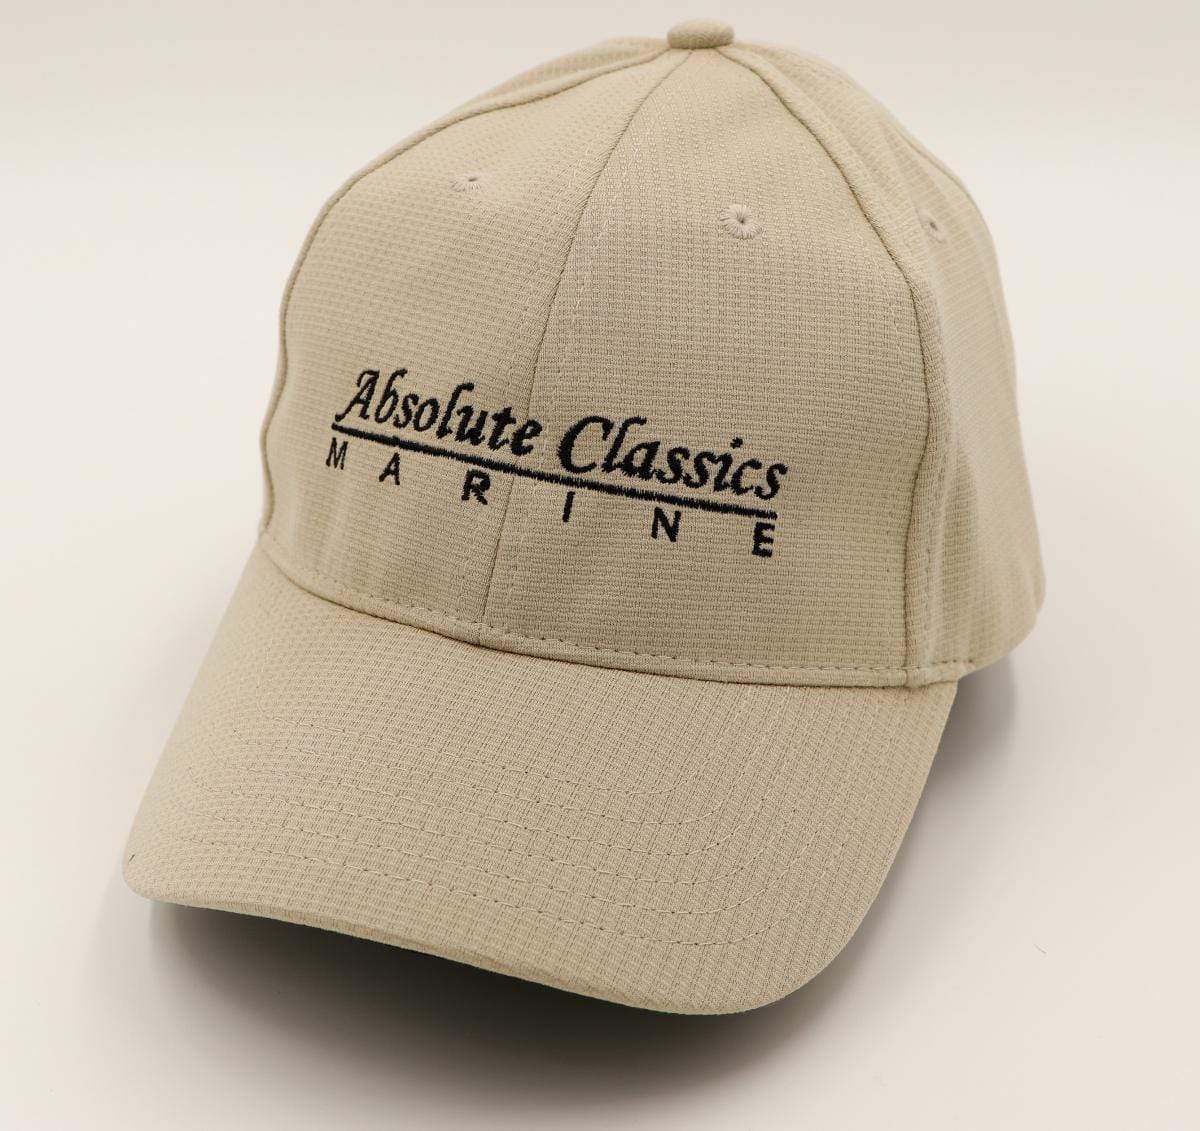 Wooden Boat Hat for Sale -  Absolute Classics Marine - 'Signature Hat' Tan with Black Trim